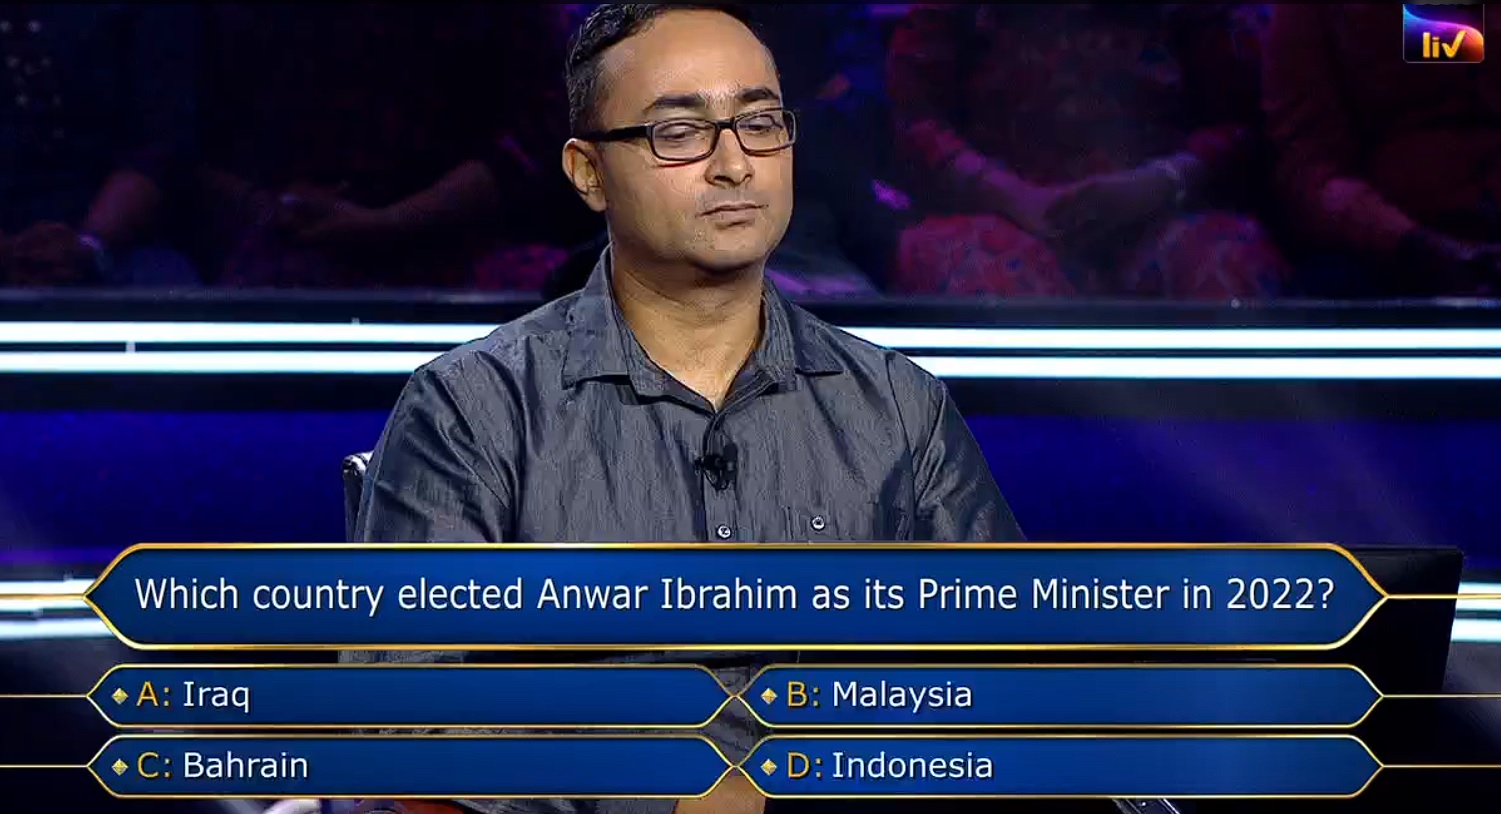 Ques : Which country elected Anwar Ibrahim as its Prime Minister in 2022?